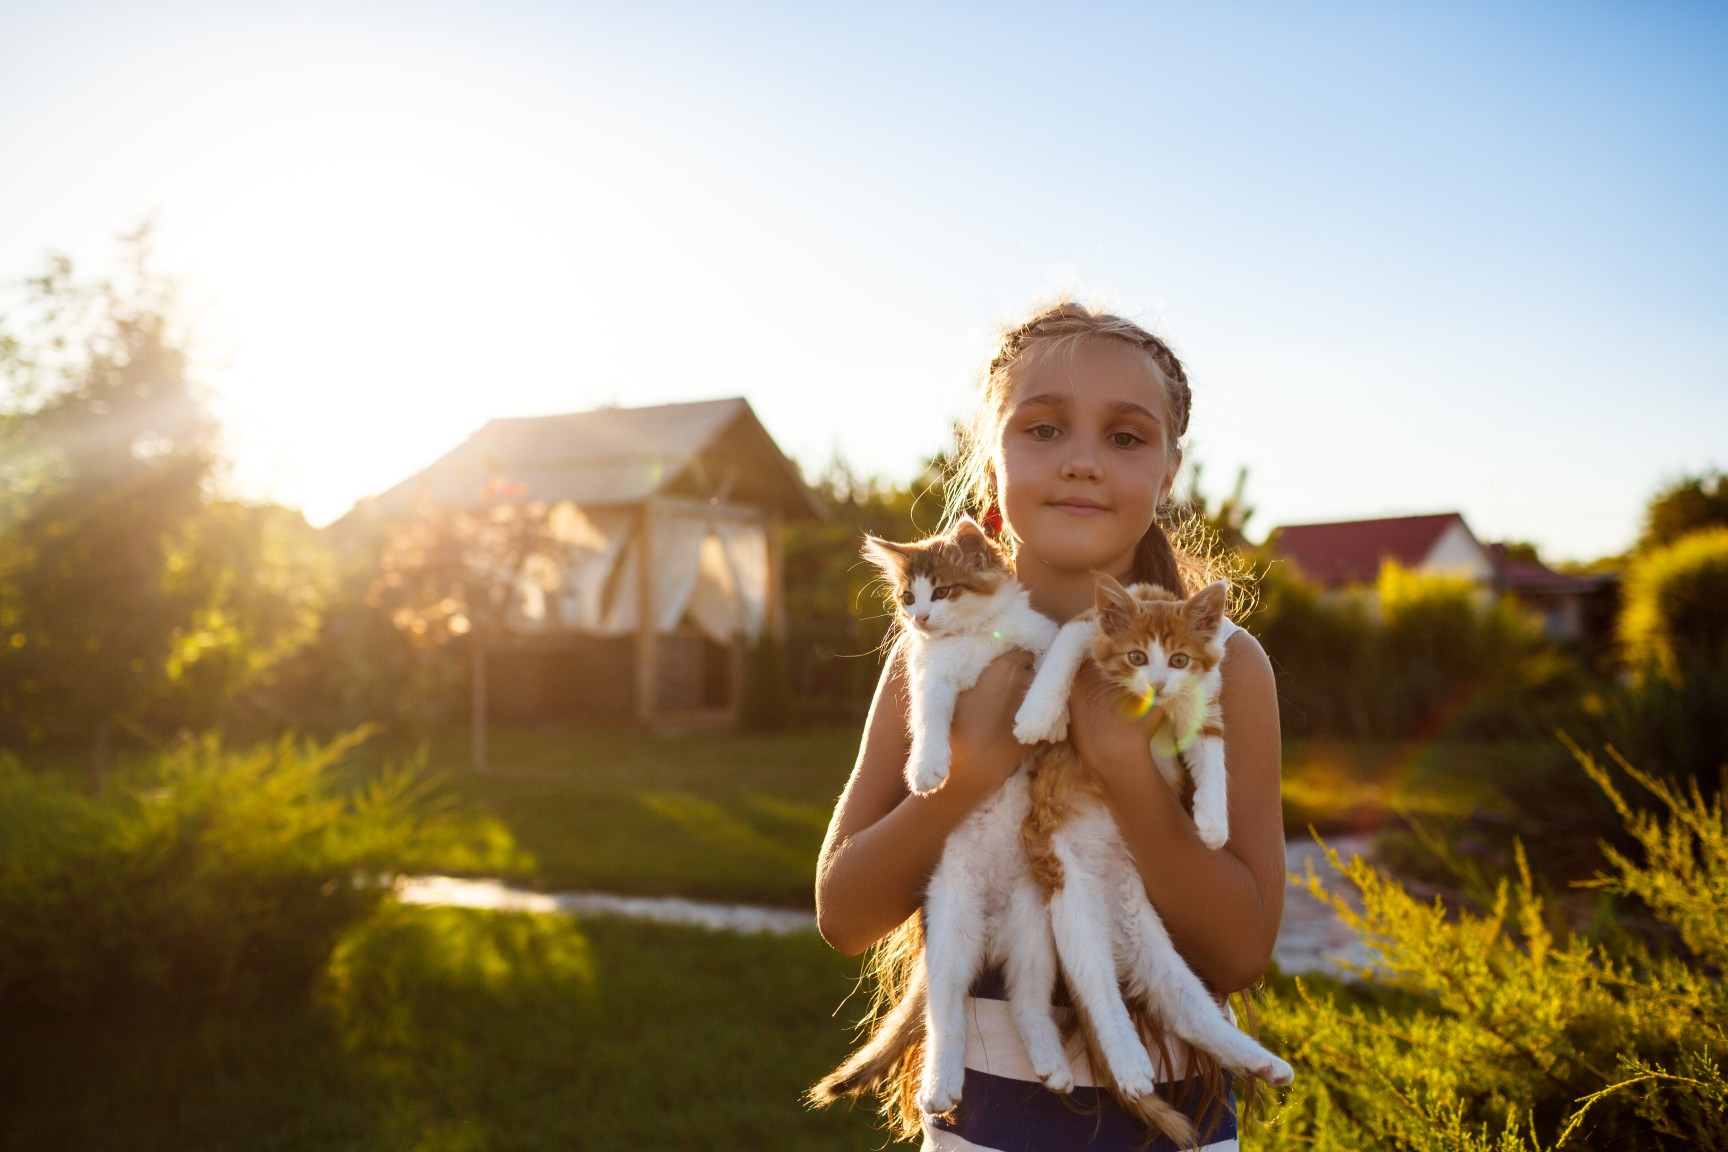 pretty-young-girl-holding-kittens-smiling (1)